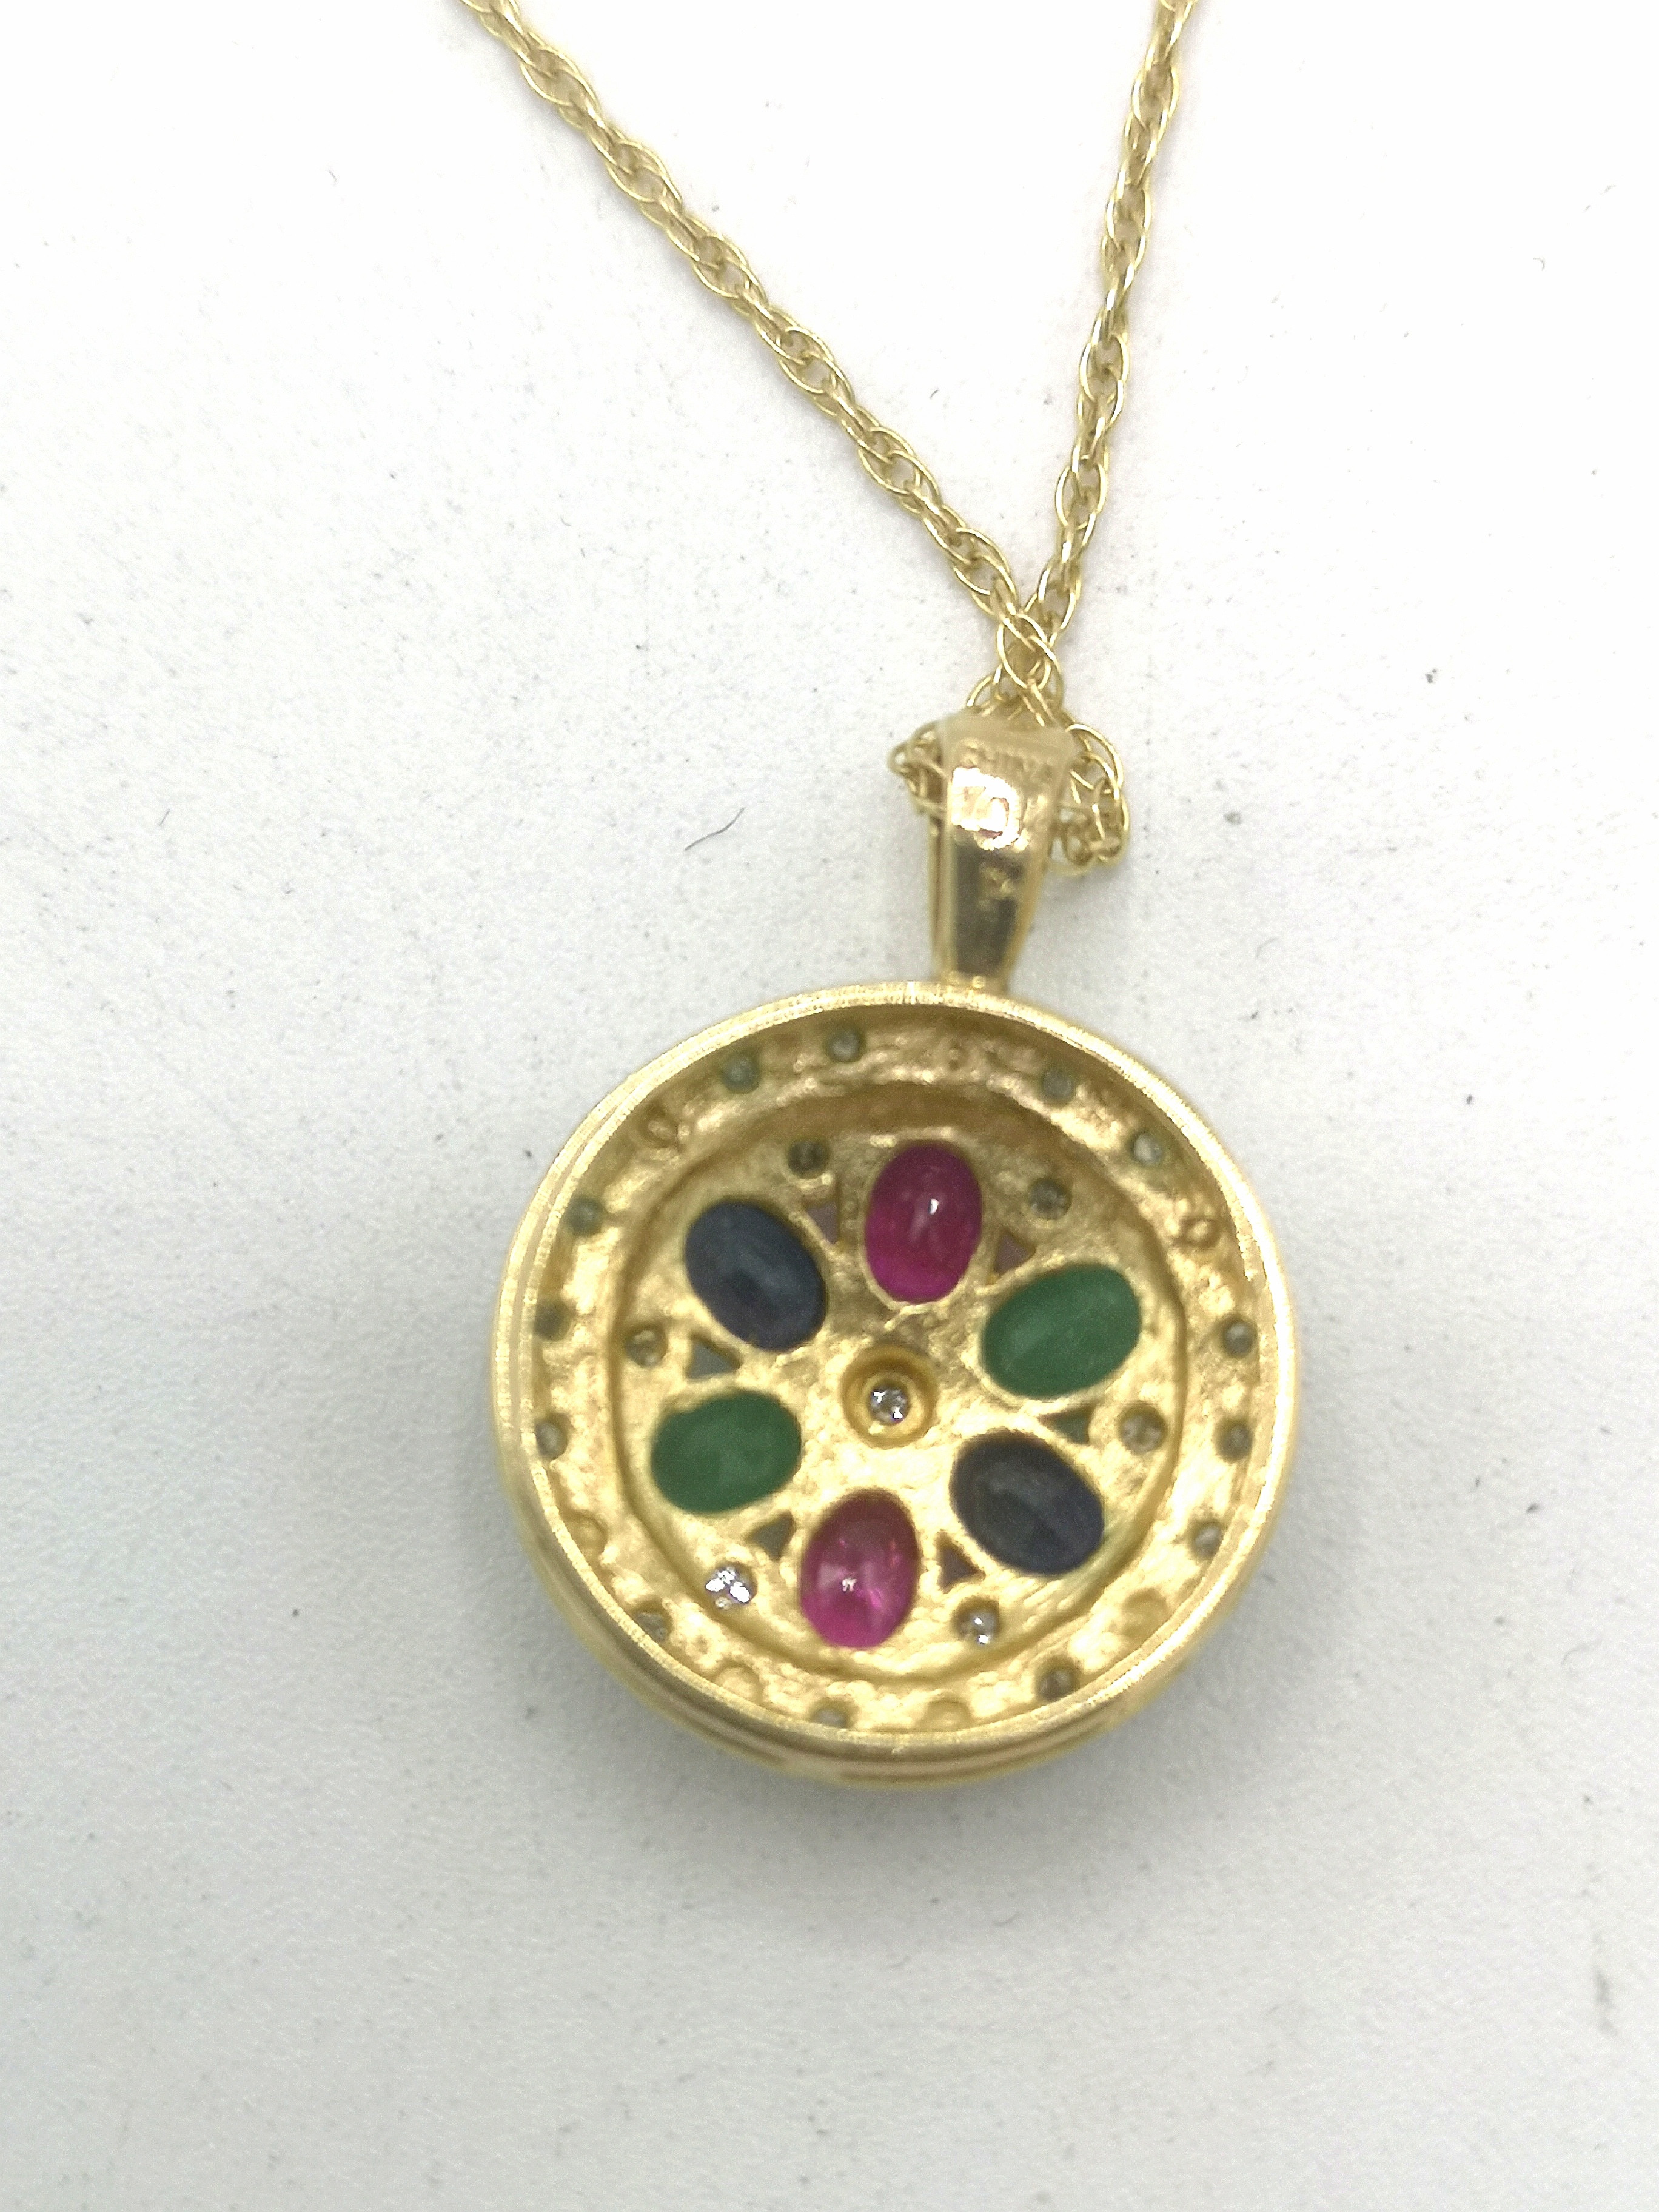 9ct gold pendant set with rubies, emeralds and sapphires - Image 8 of 8